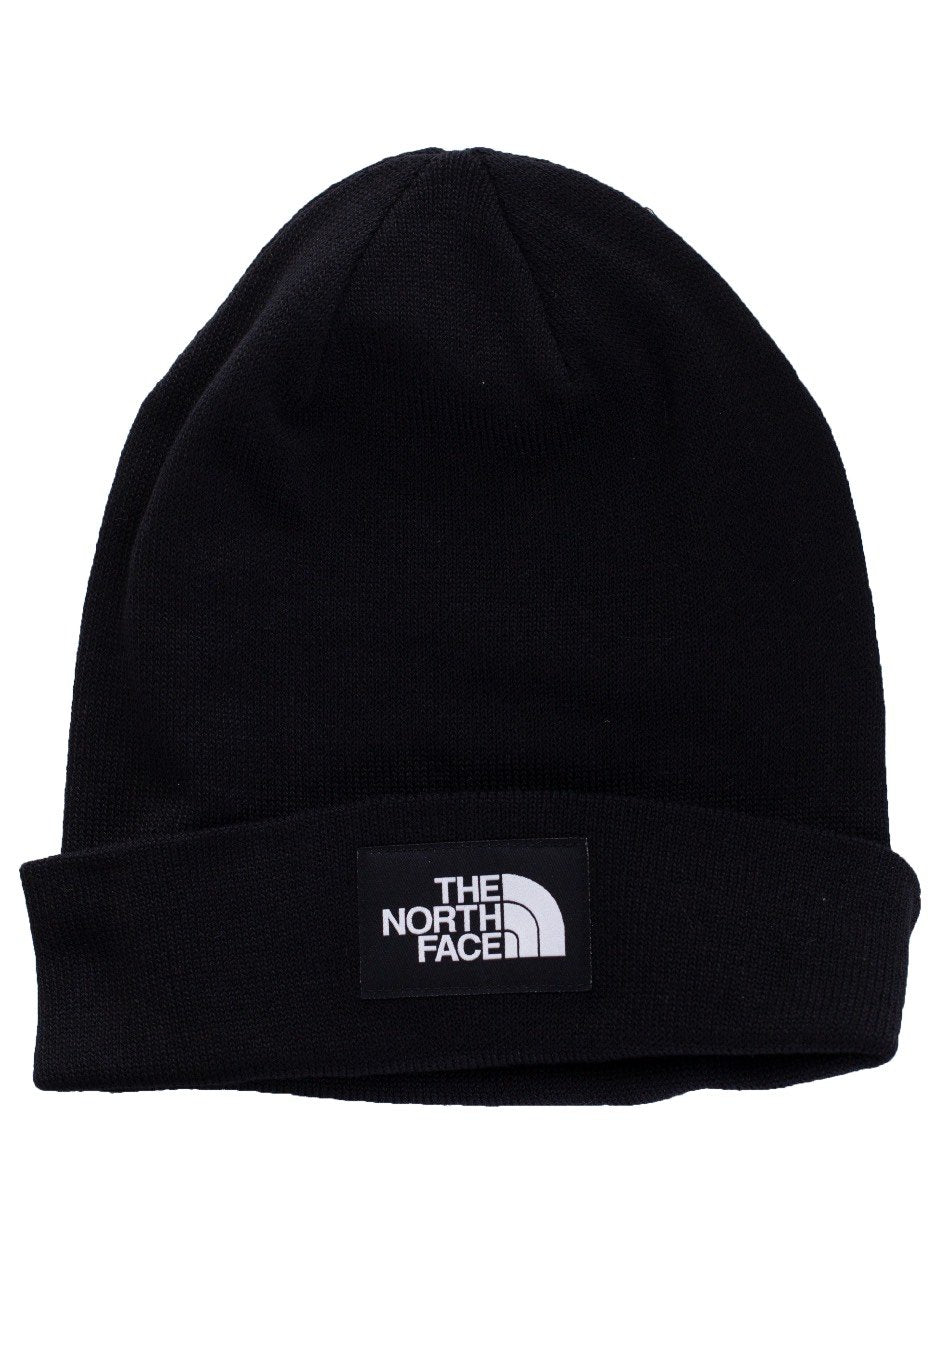 The North Face - Dock Worker Recycled TNF Black - Beanie